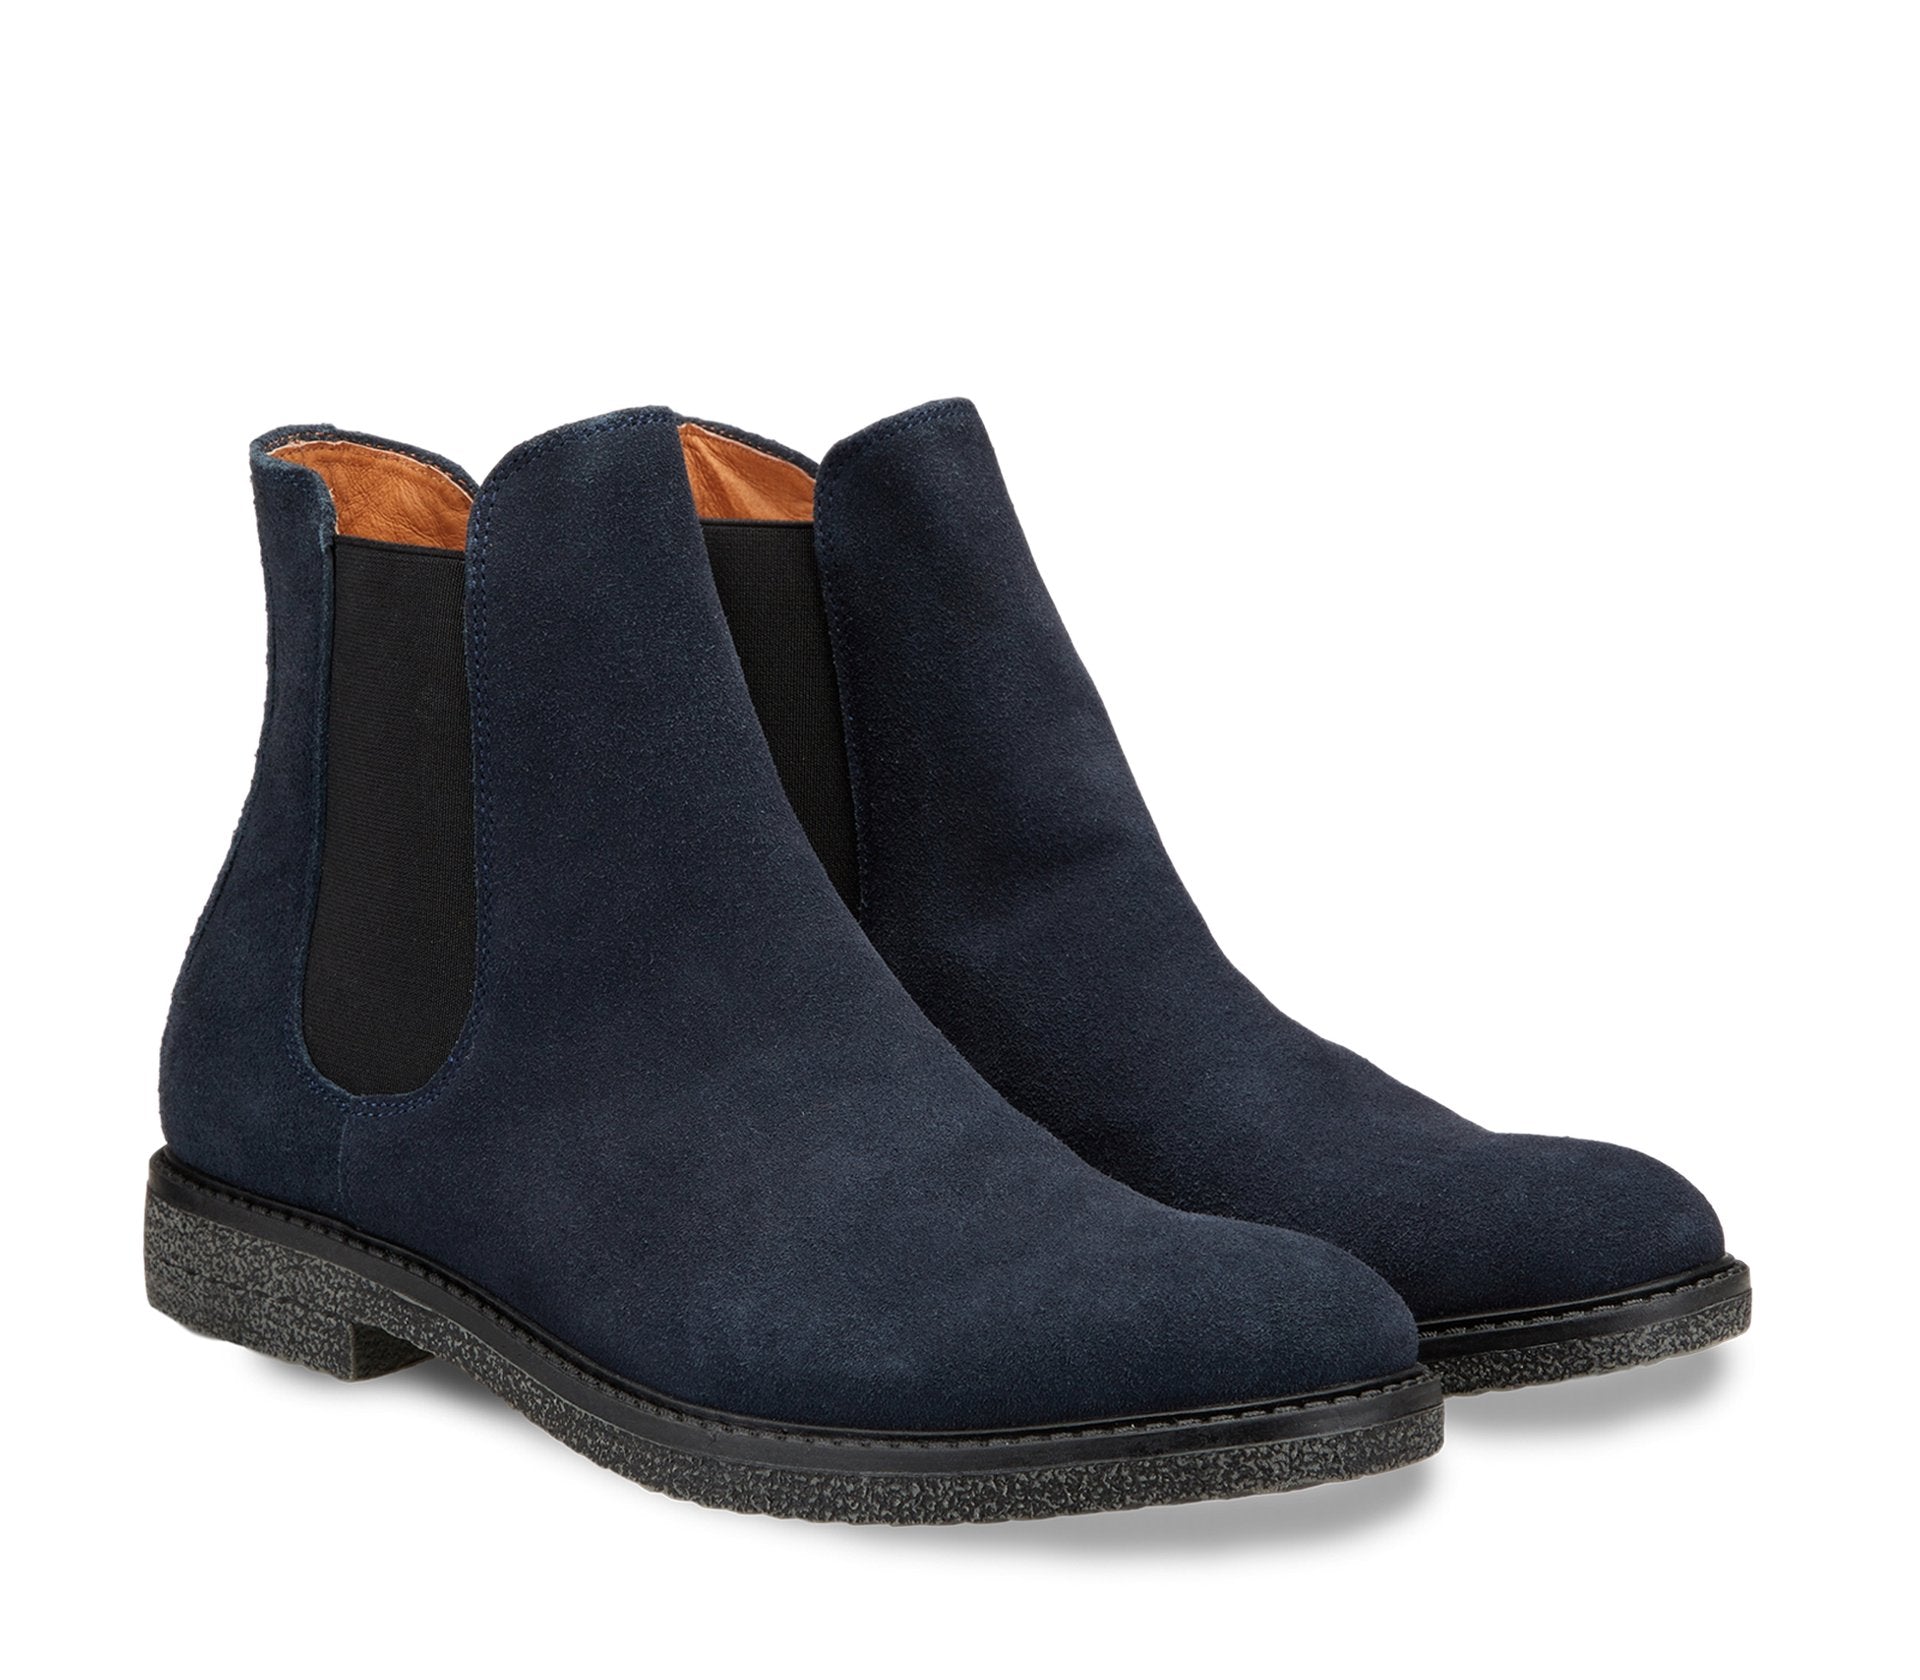 Blue Men's Chelsea Ankle Boots in Suede Leather with Elasticized Inserts